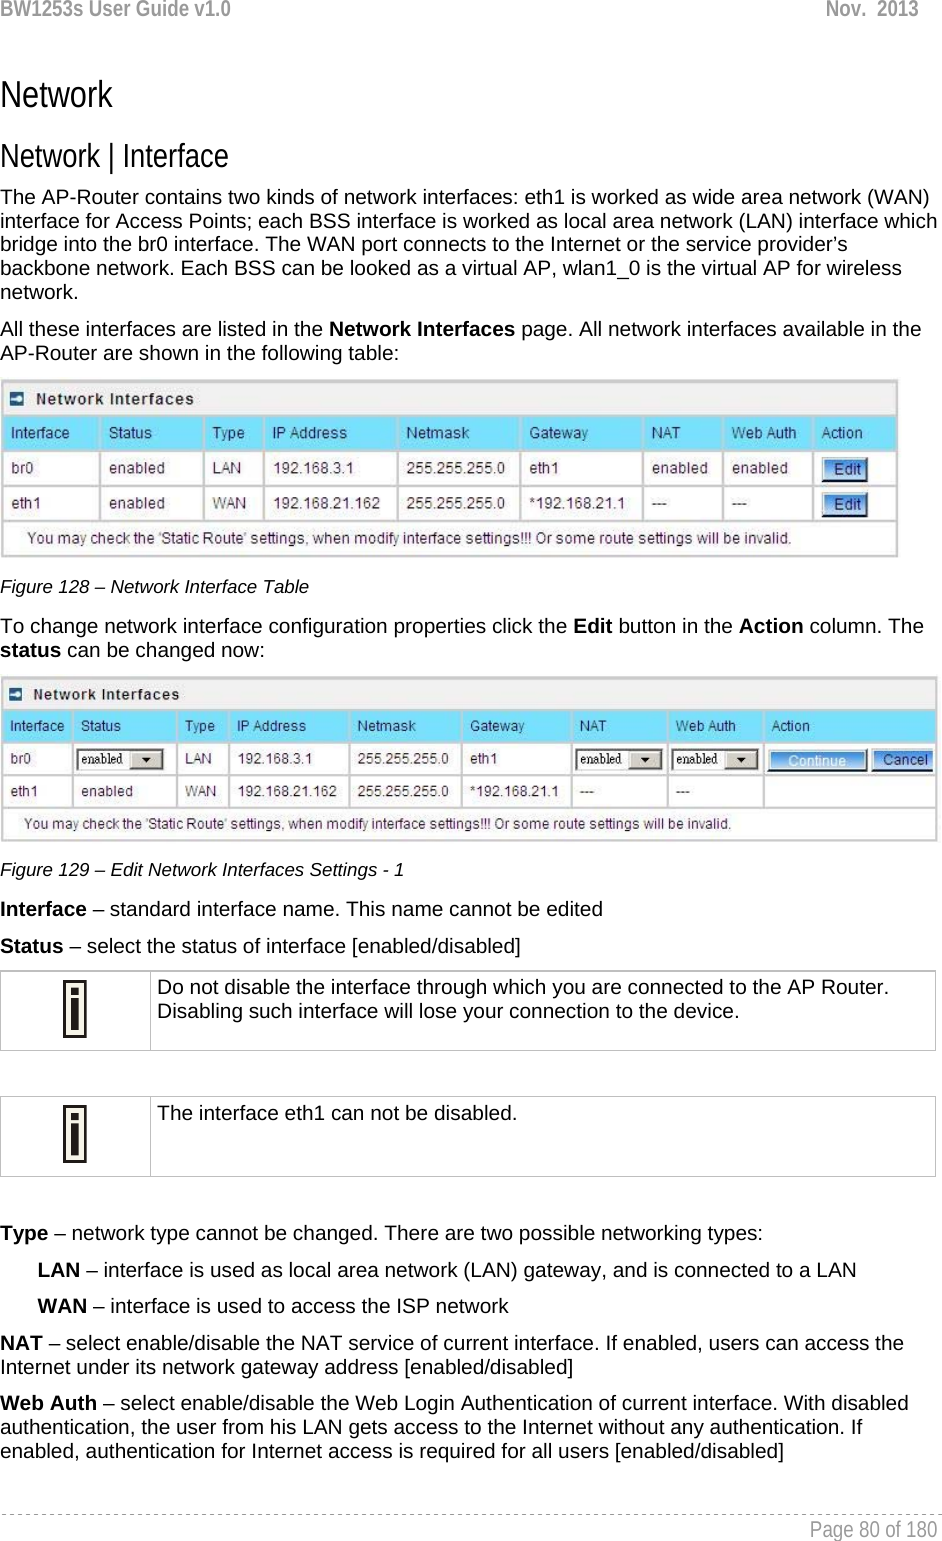 BW1253s User Guide v1.0  Nov.  2013     Page 80 of 180   Network Network | Interface  The AP-Router contains two kinds of network interfaces: eth1 is worked as wide area network (WAN) interface for Access Points; each BSS interface is worked as local area network (LAN) interface which bridge into the br0 interface. The WAN port connects to the Internet or the service provider’s backbone network. Each BSS can be looked as a virtual AP, wlan1_0 is the virtual AP for wireless network. All these interfaces are listed in the Network Interfaces page. All network interfaces available in the AP-Router are shown in the following table:  Figure 128 – Network Interface Table To change network interface configuration properties click the Edit button in the Action column. The status can be changed now:  Figure 129 – Edit Network Interfaces Settings - 1 Interface – standard interface name. This name cannot be edited Status – select the status of interface [enabled/disabled]  Do not disable the interface through which you are connected to the AP Router. Disabling such interface will lose your connection to the device.   The interface eth1 can not be disabled.  Type – network type cannot be changed. There are two possible networking types: LAN – interface is used as local area network (LAN) gateway, and is connected to a LAN WAN – interface is used to access the ISP network NAT – select enable/disable the NAT service of current interface. If enabled, users can access the Internet under its network gateway address [enabled/disabled] Web Auth – select enable/disable the Web Login Authentication of current interface. With disabled authentication, the user from his LAN gets access to the Internet without any authentication. If enabled, authentication for Internet access is required for all users [enabled/disabled]  